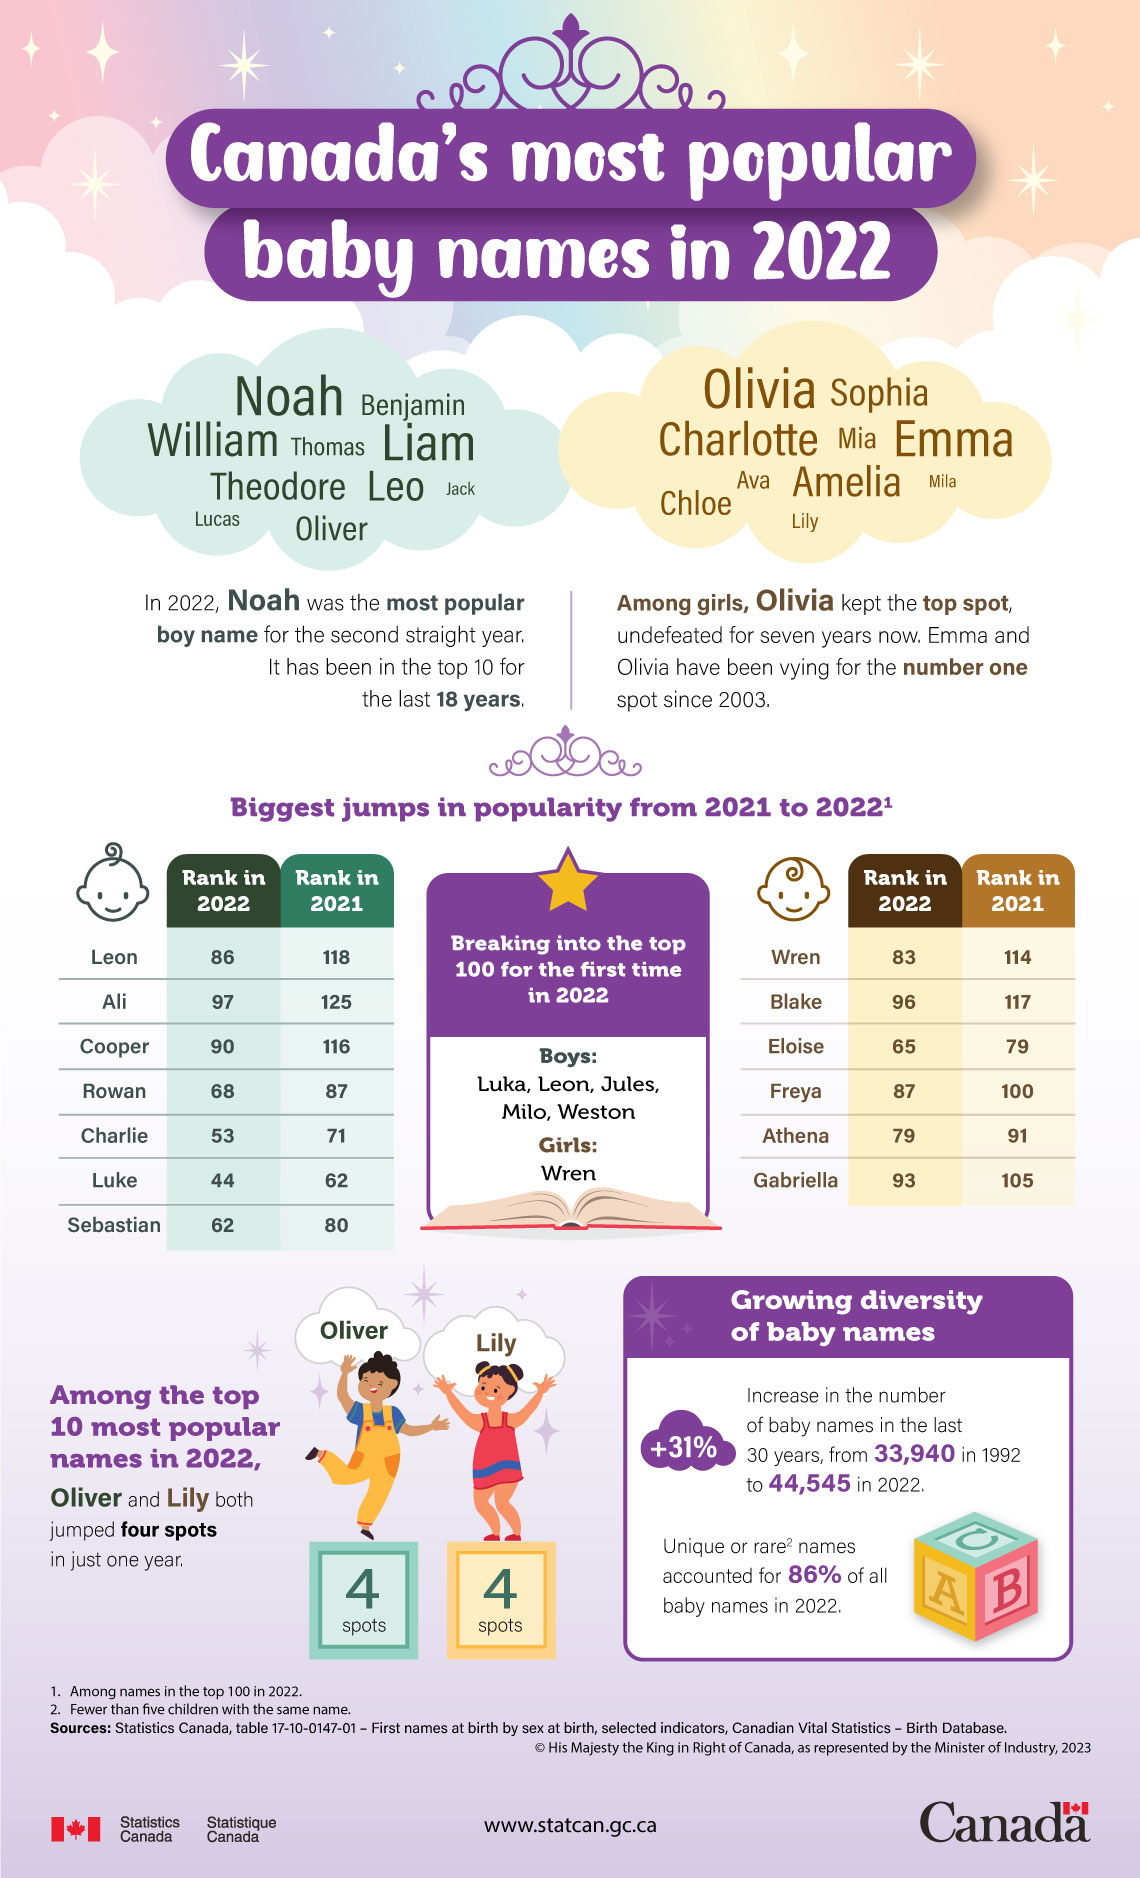 Canada's most popular baby names in 2022